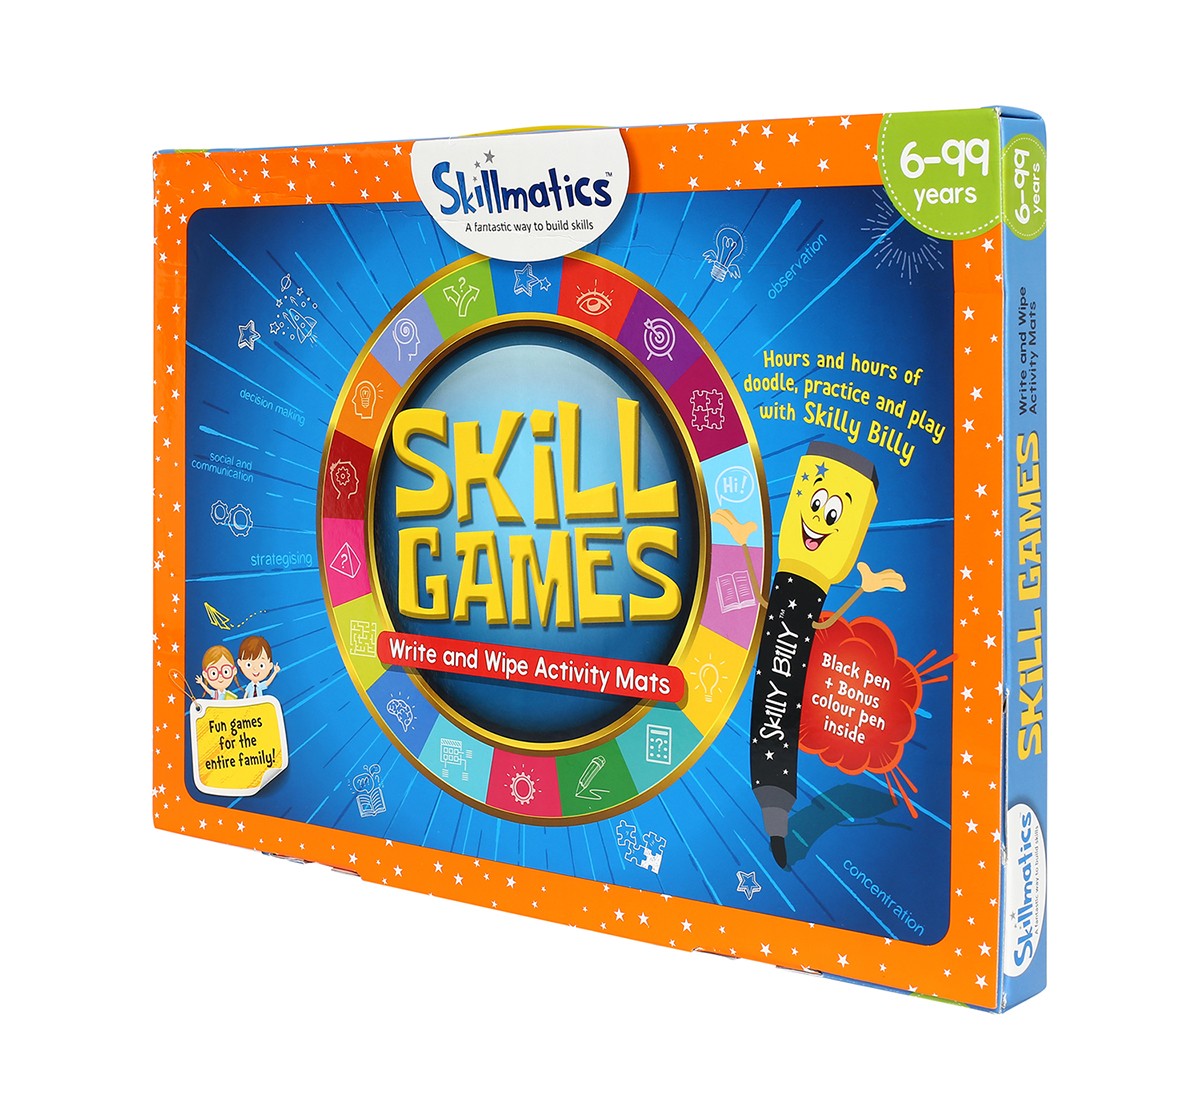 Skillmatics Educational Game: Skill Games (6-99 Years) | Fun Learning Games And Activities For Kids Games for Kids age 6Y+ 